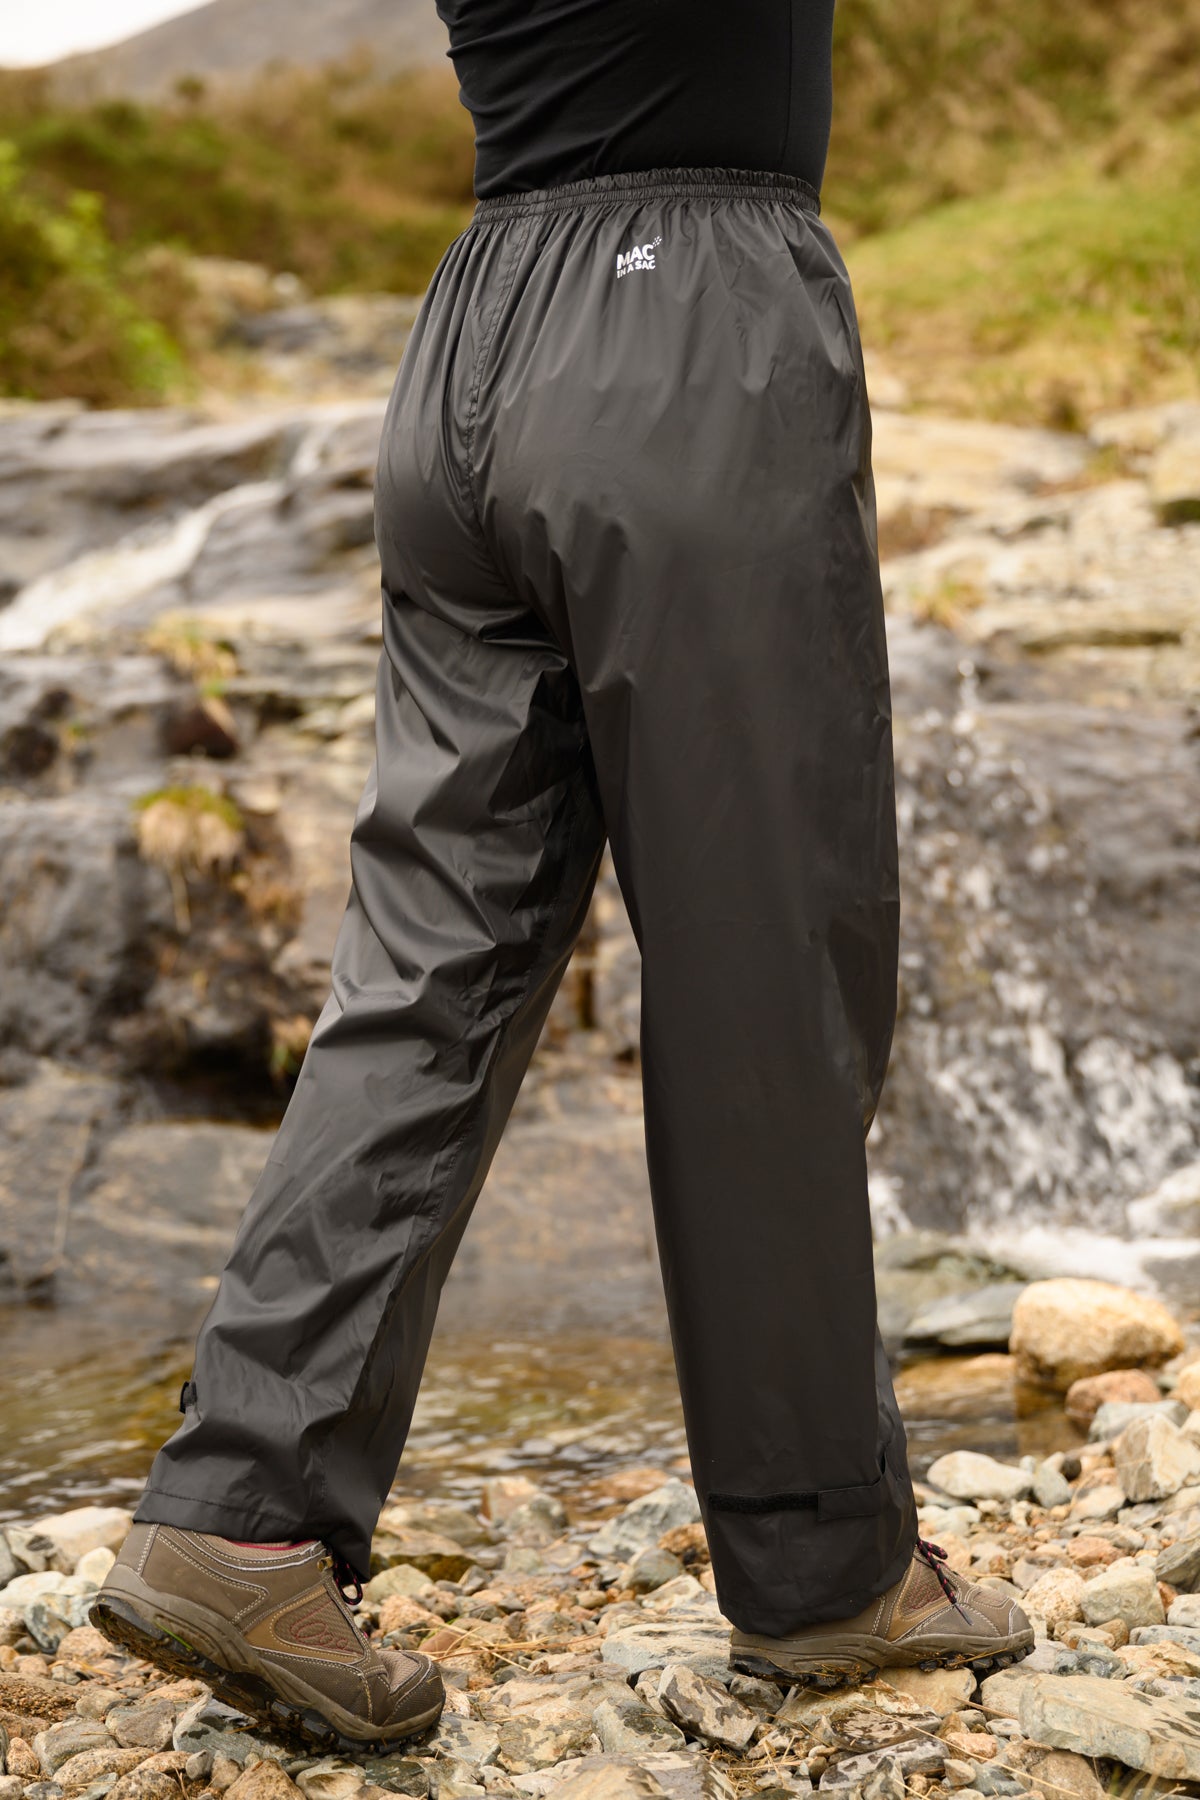 Women's Waterproof Packable Trousers, Overtrousers & Pants for